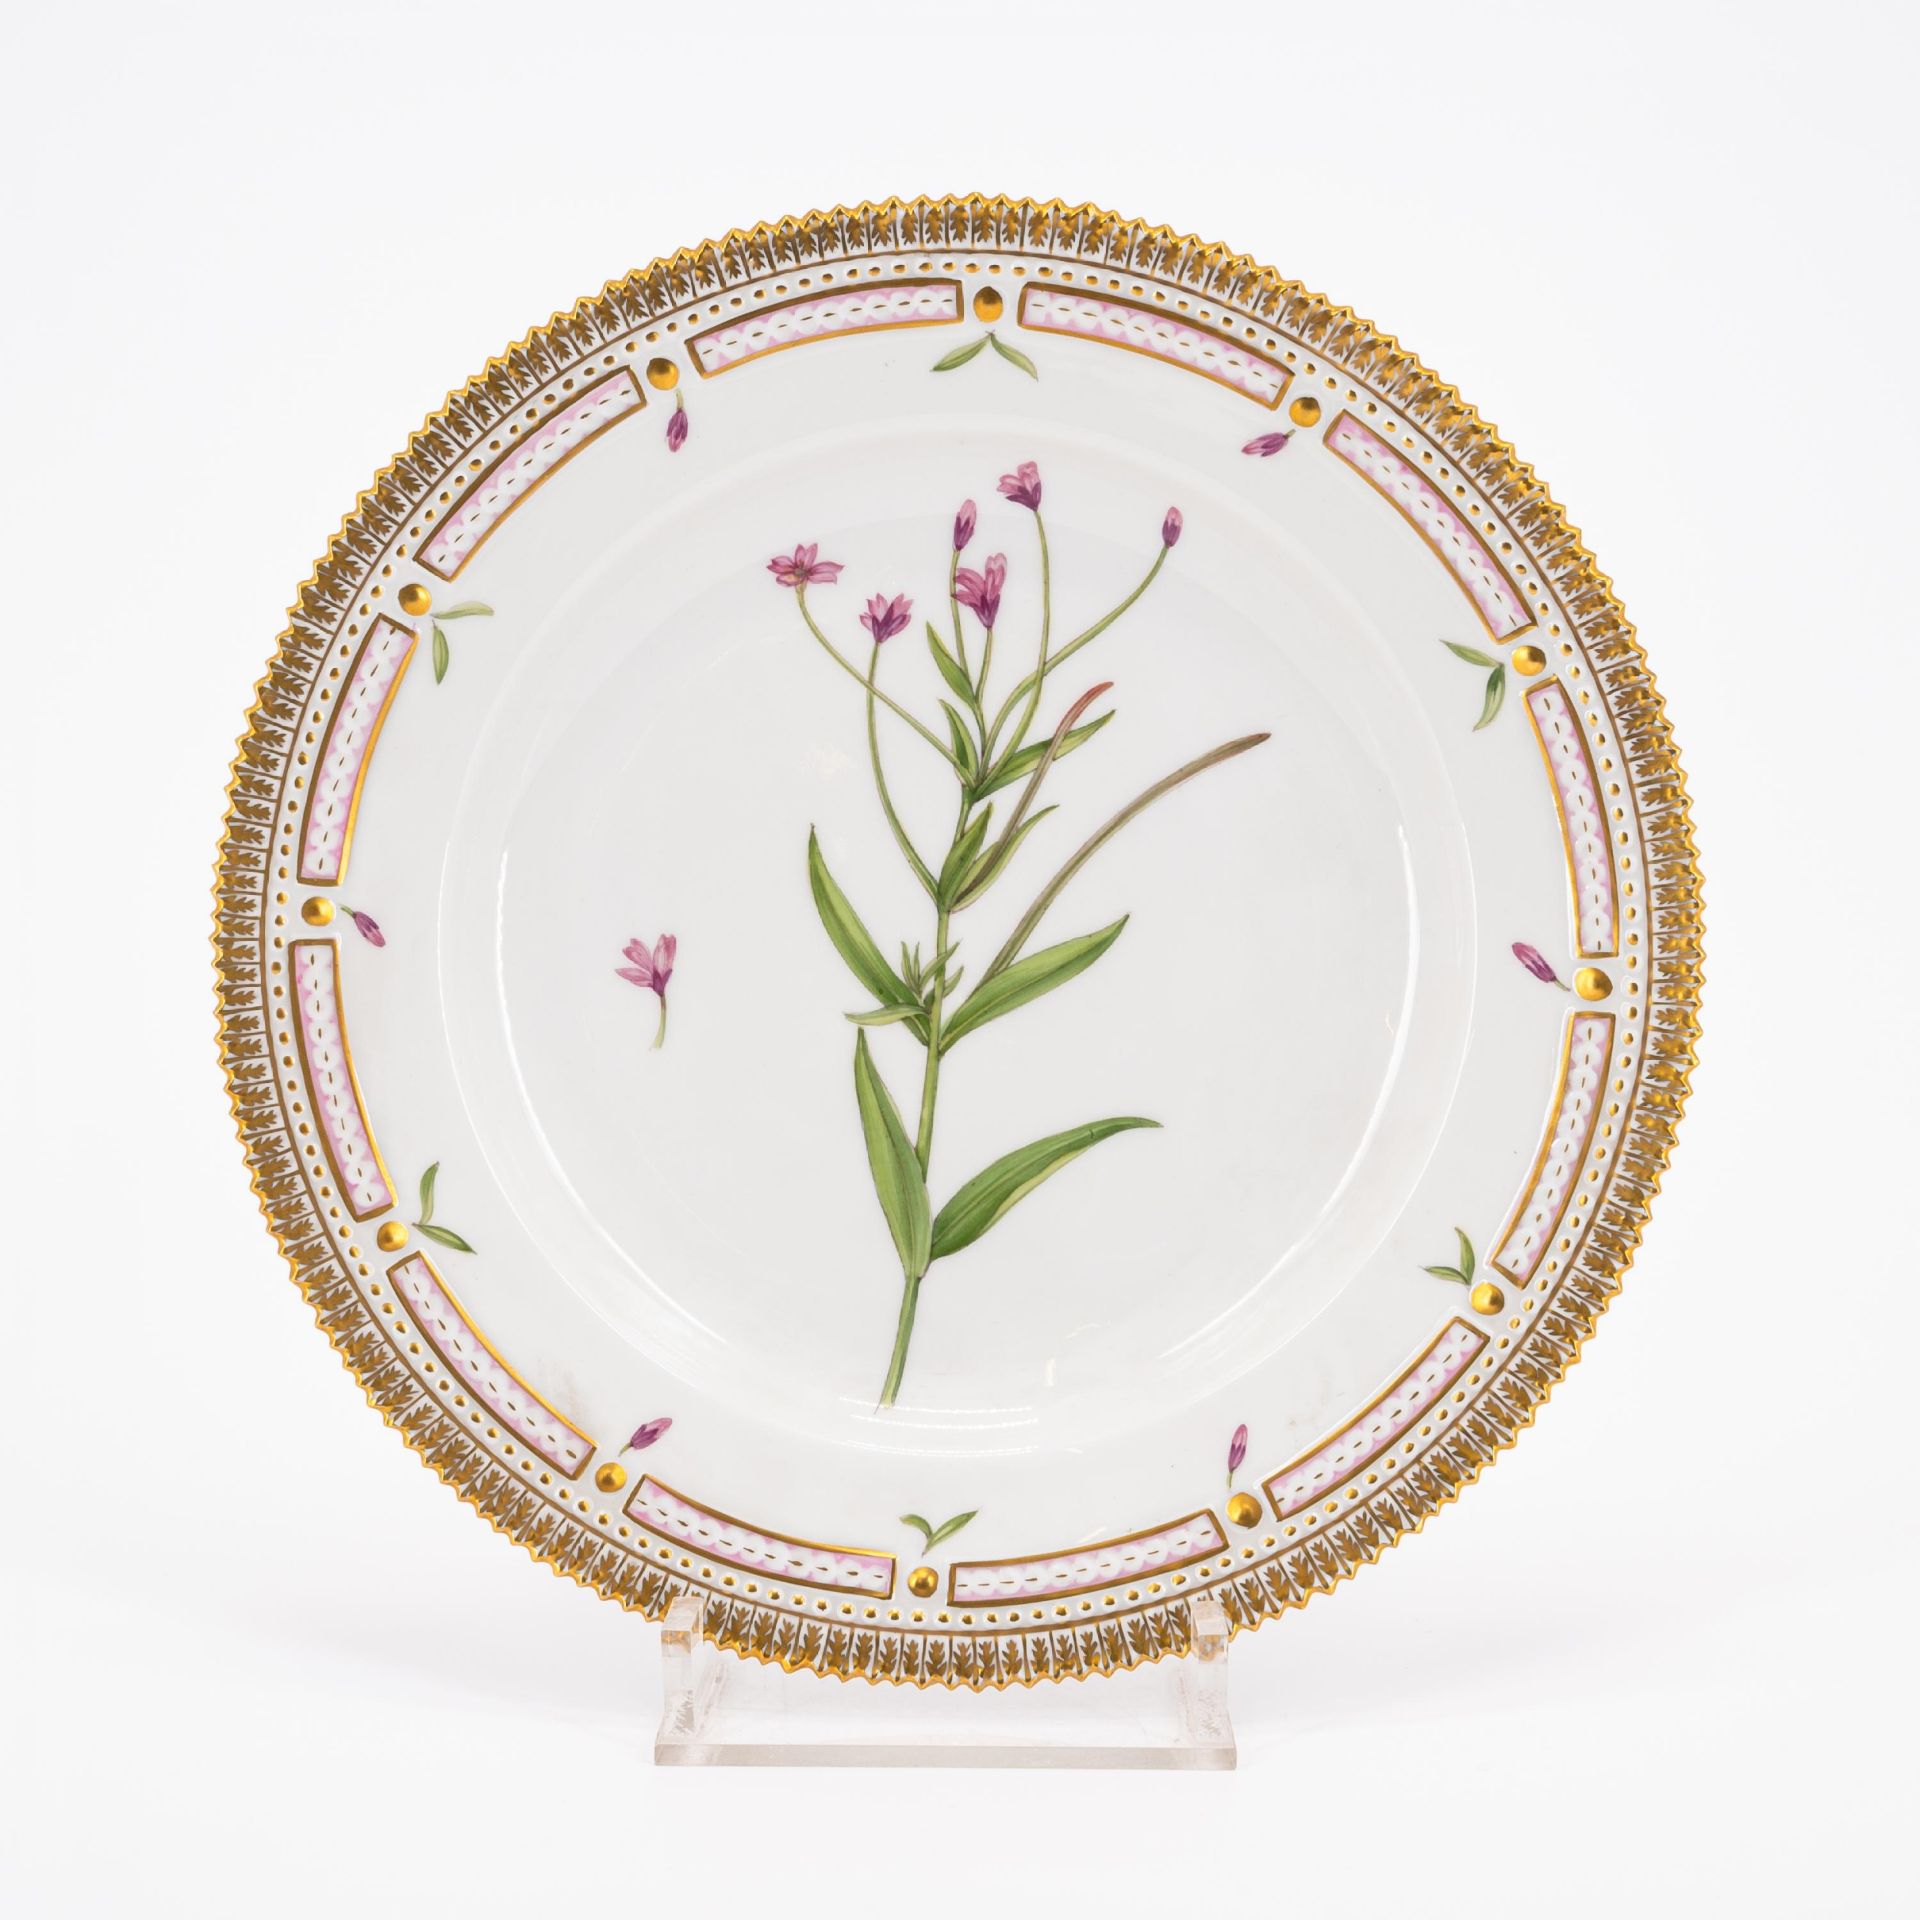 18 PIECES FROM A PORCELAIN DINNER SERVICE 'FLORA DANICA' - Image 5 of 26